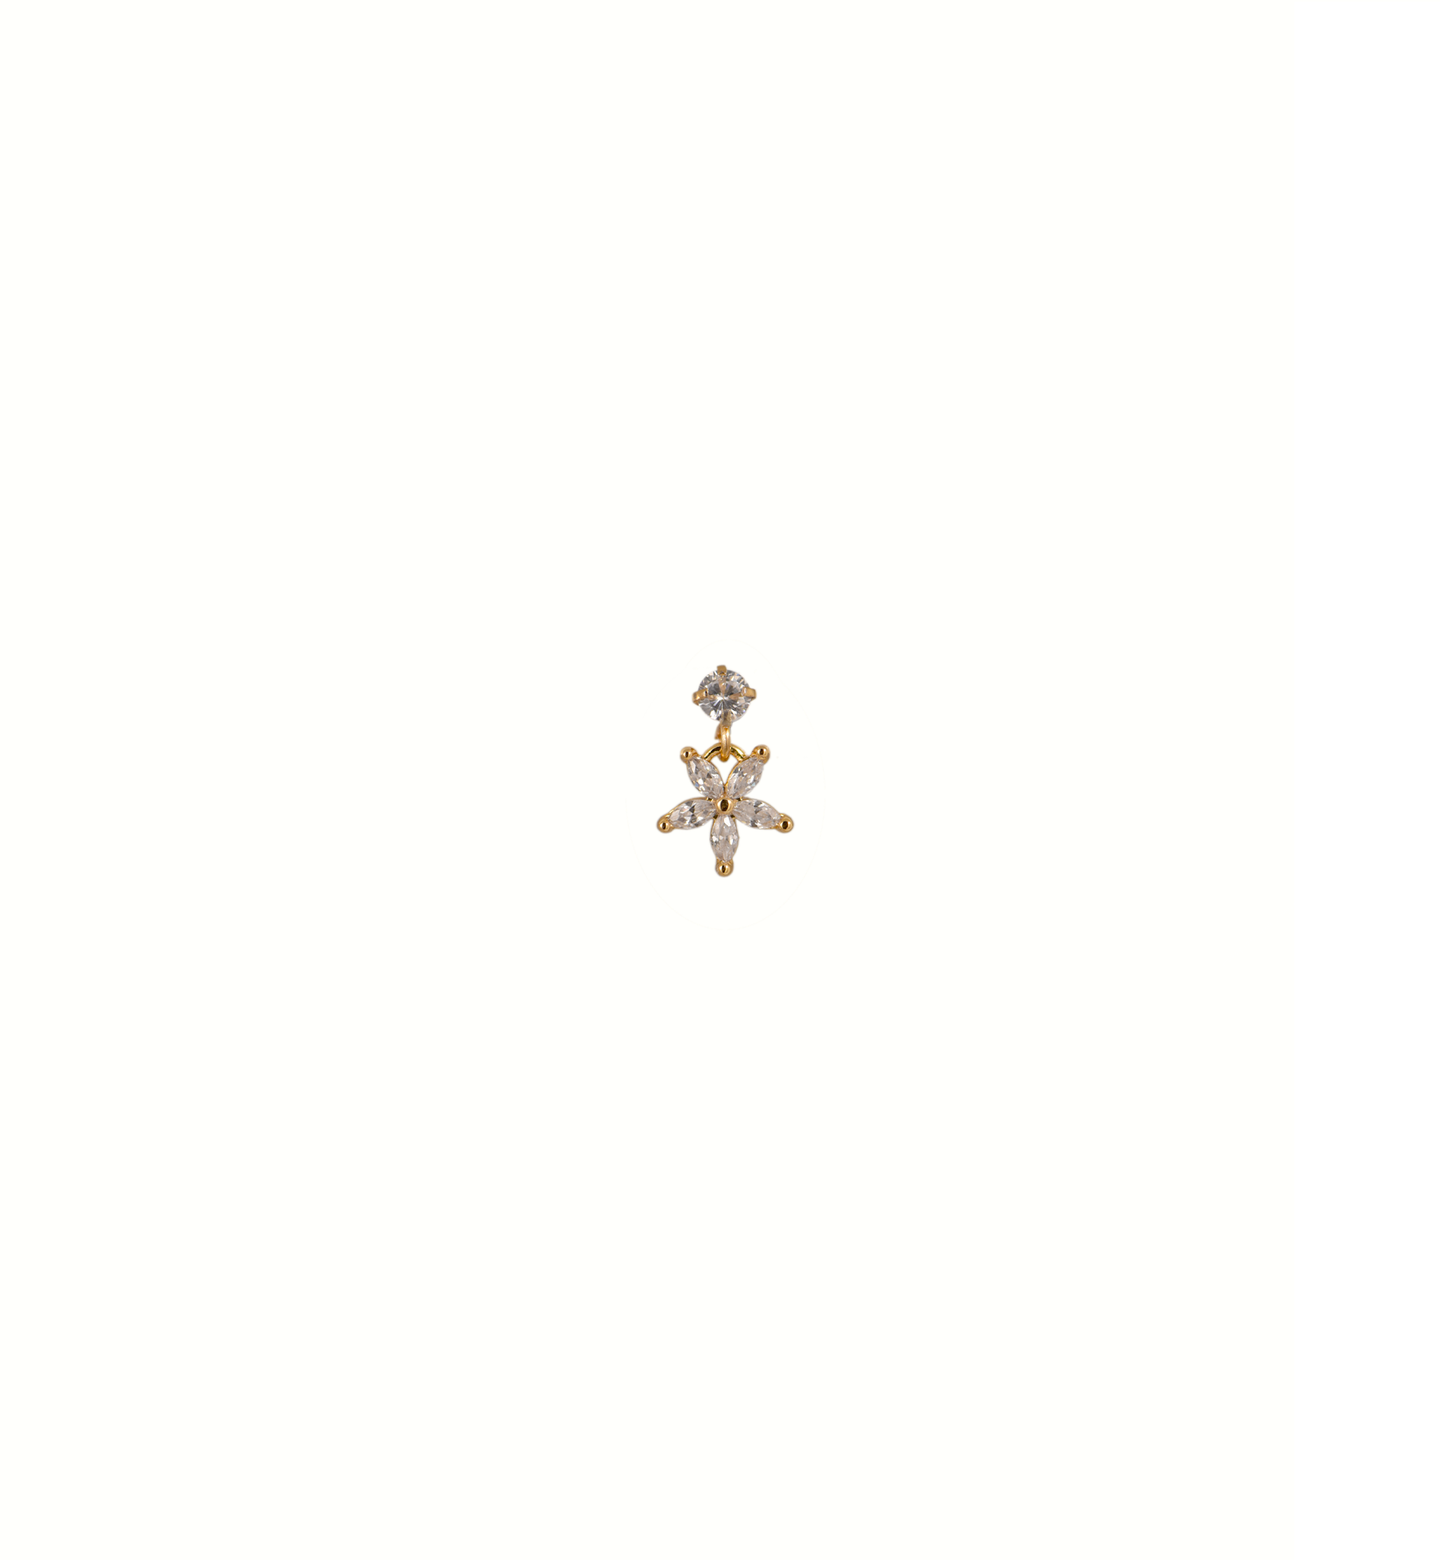 Posie Gold-Plated Stud Earring With Screw Backing